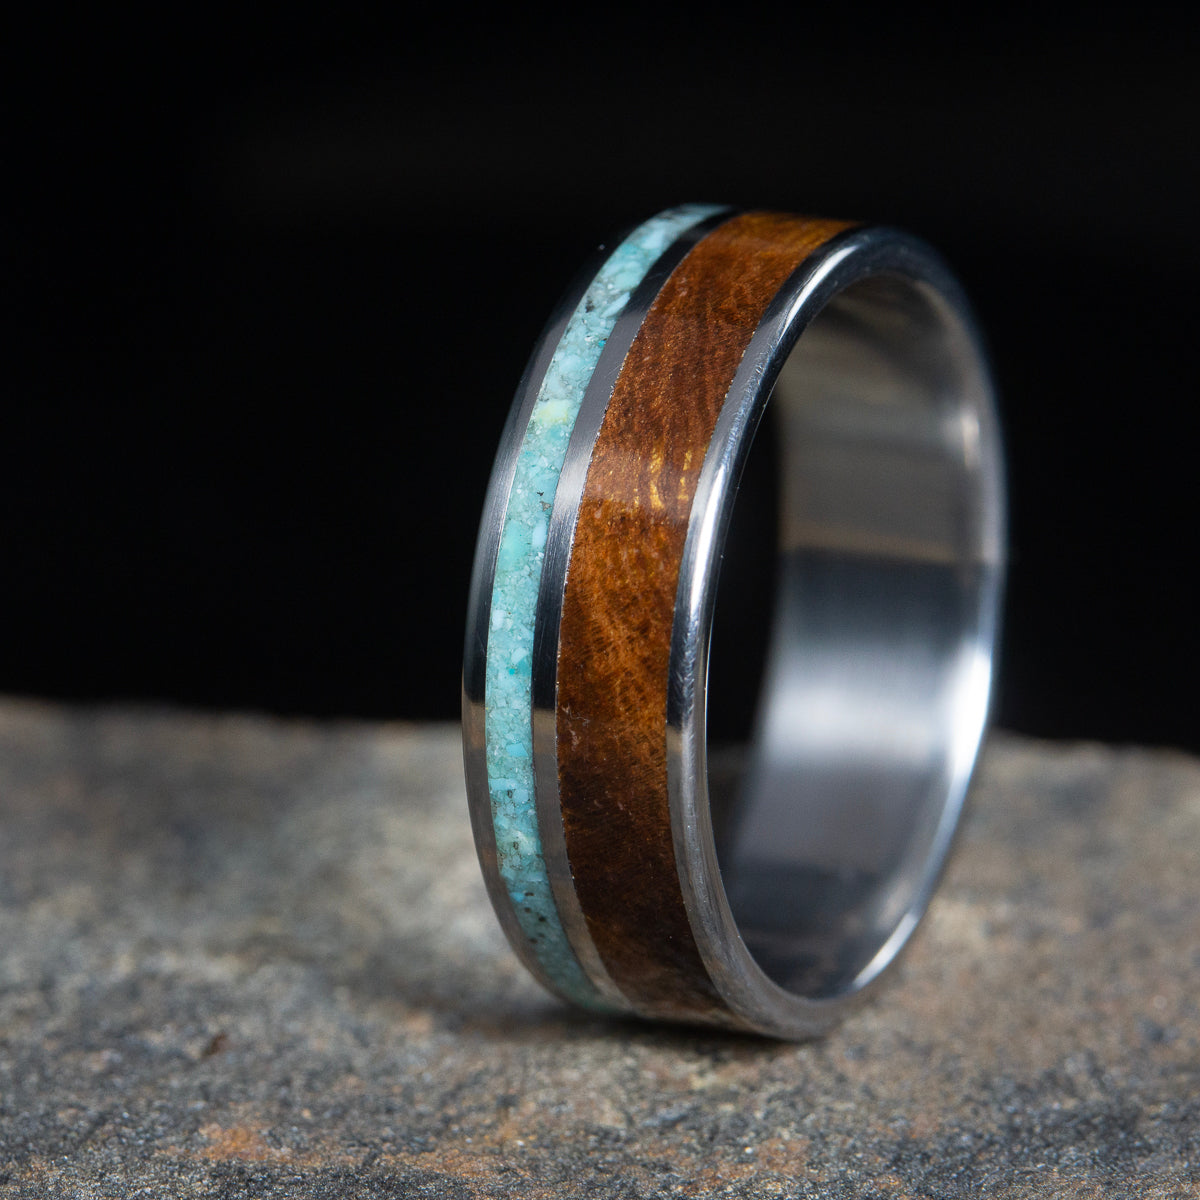 Turquoise and ironwood wooden inlay ring